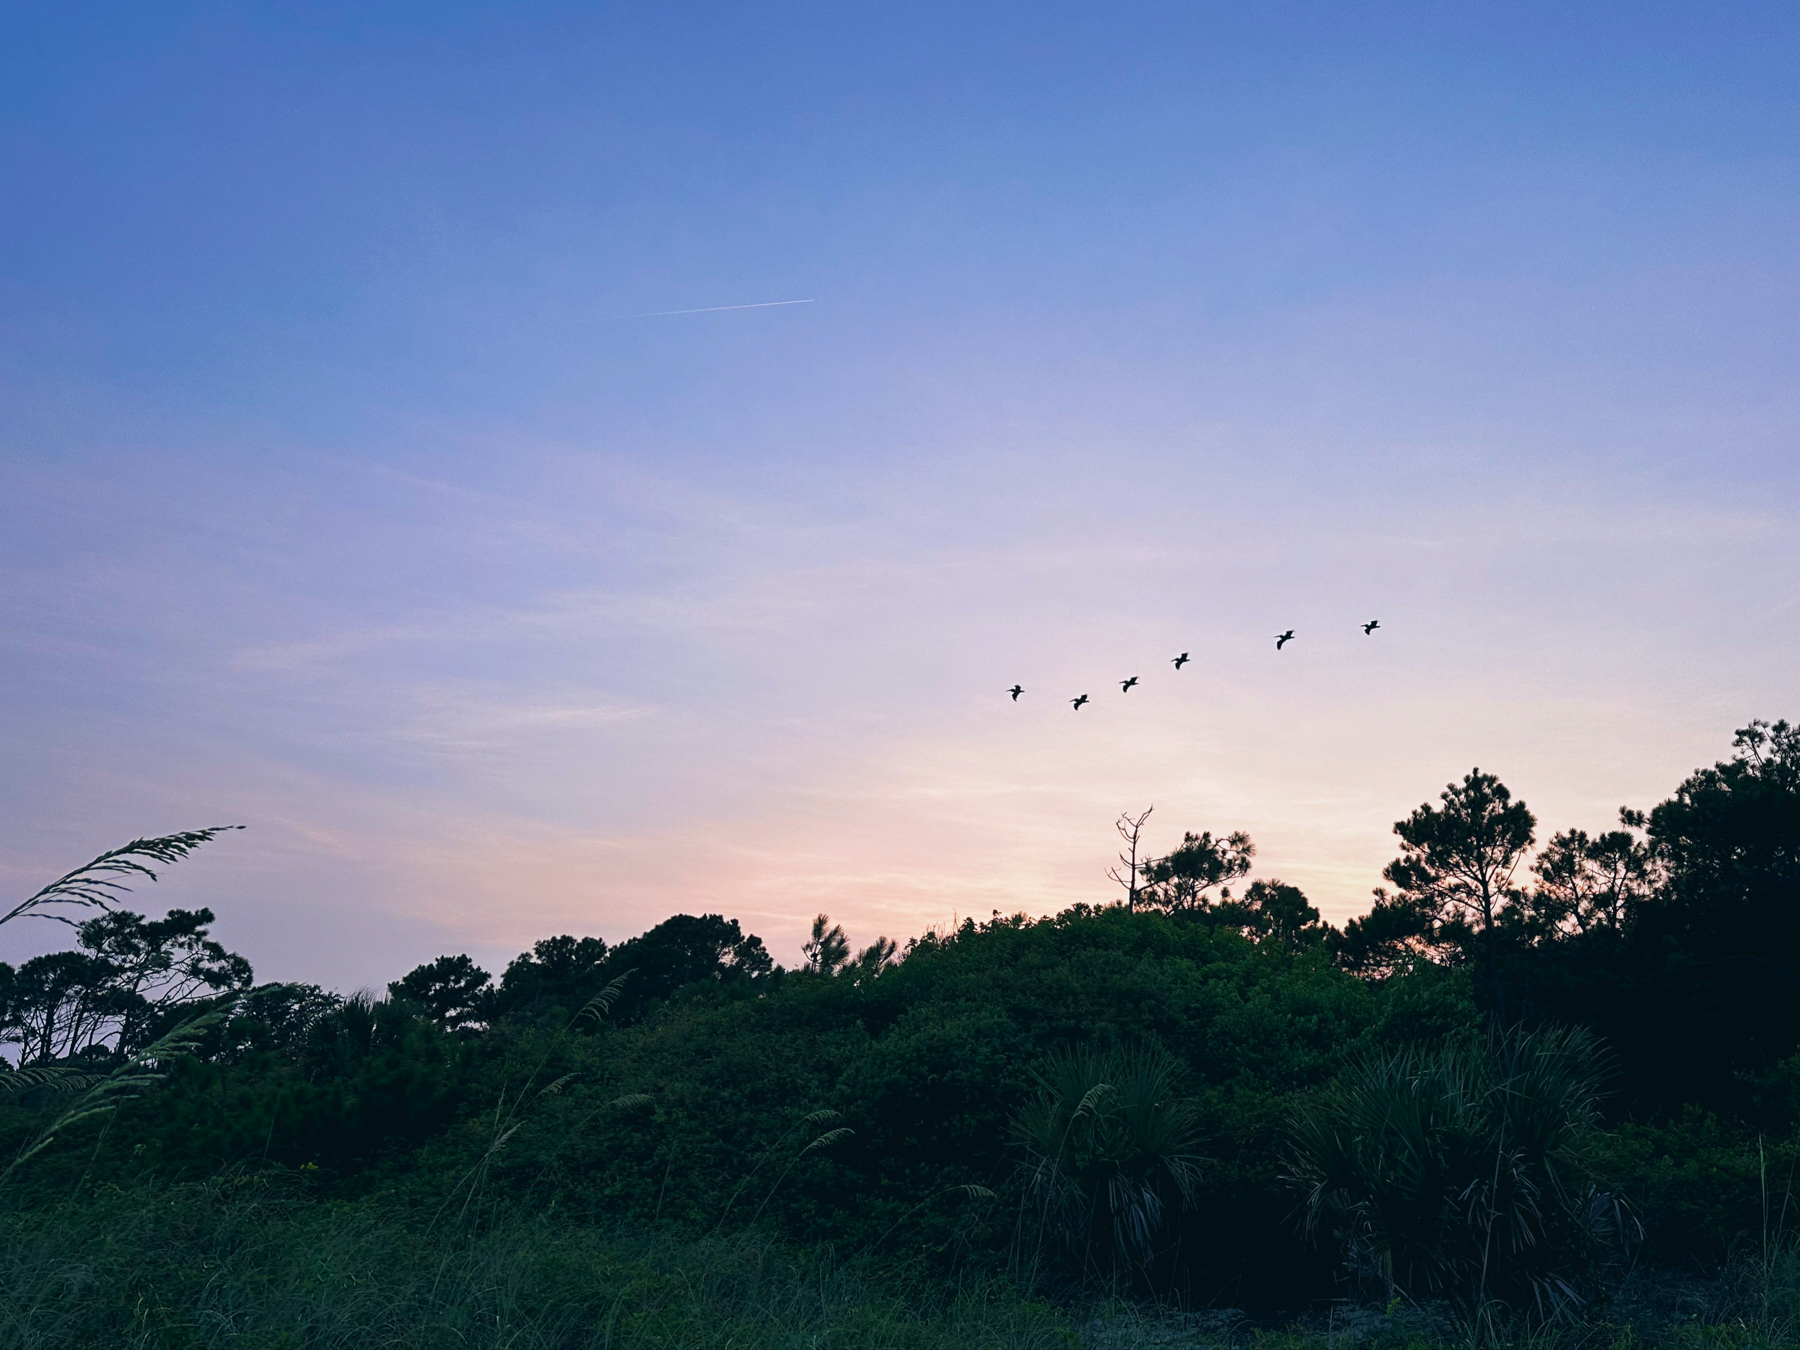 A small flock of six pelicans flies over some trees in front of a sunset sky.